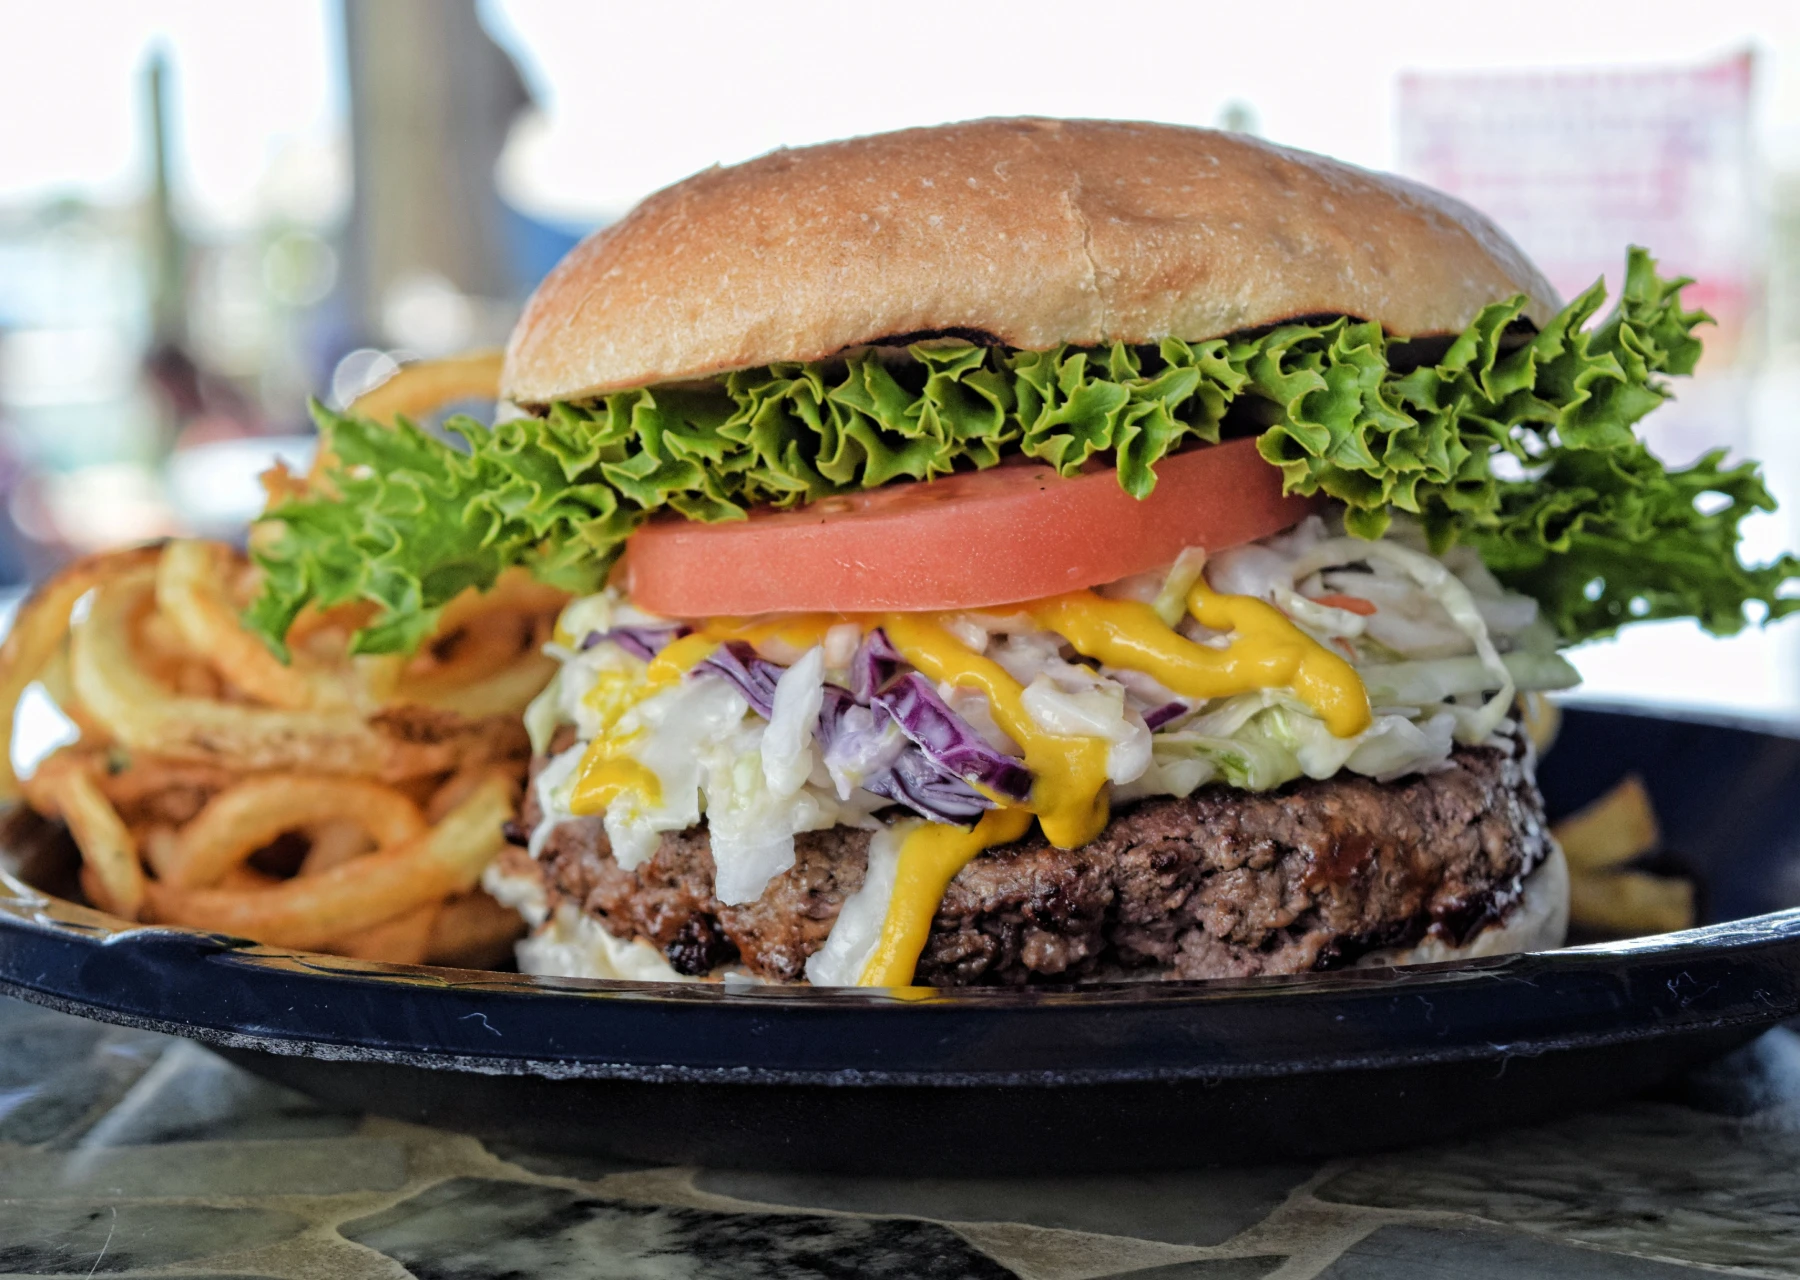 A Juicy Burger with Cole Slaw and a Side of Curly Fries at SmacNallys Waterfront Bar and Grill - Hero